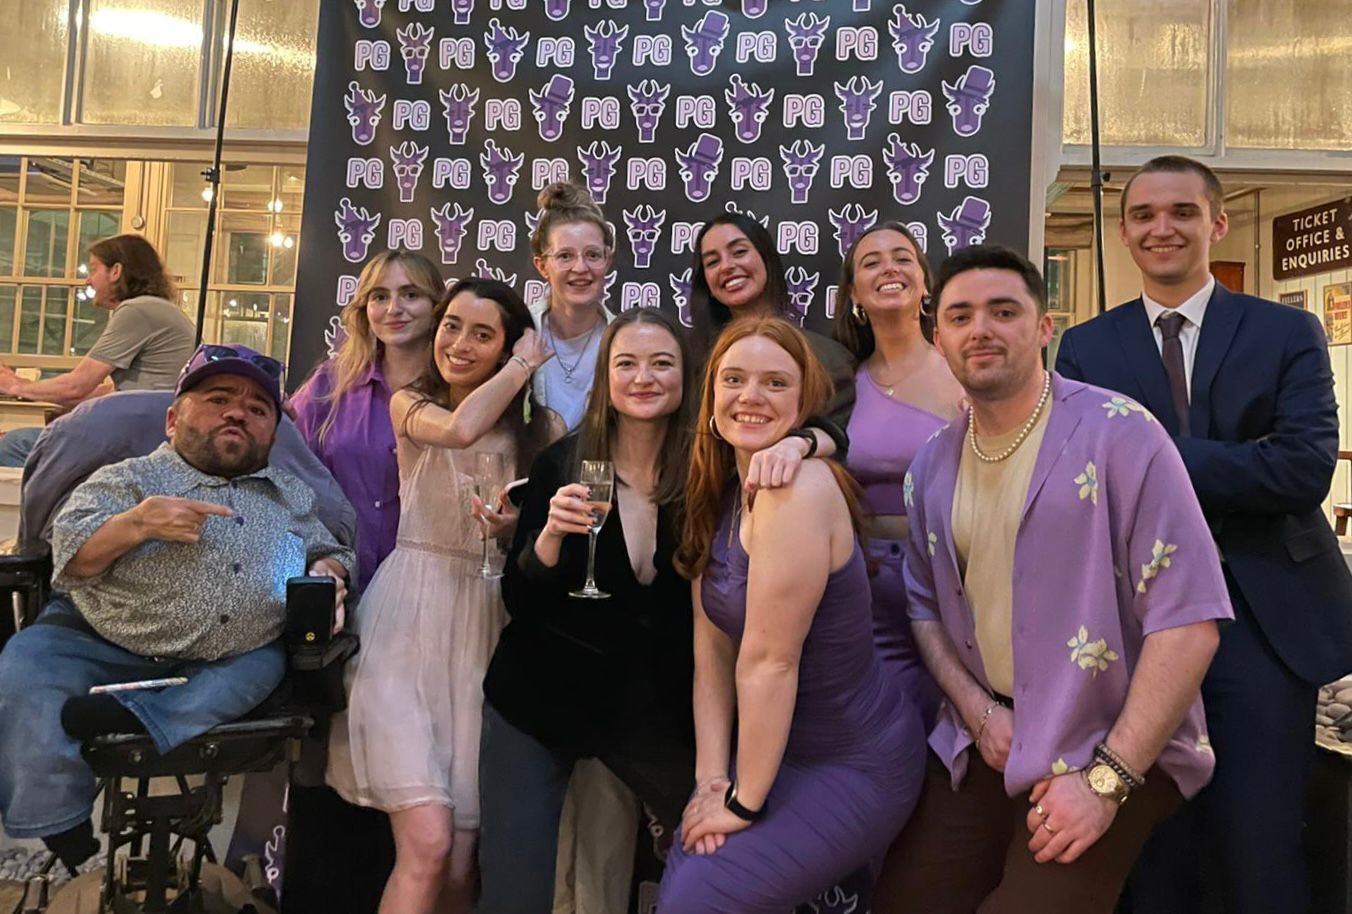 The whole purple goat team except for Martyn Sibley stand in front of a purple goat banner. They are all smiling as they celebrate Purple Goat's second birthday.